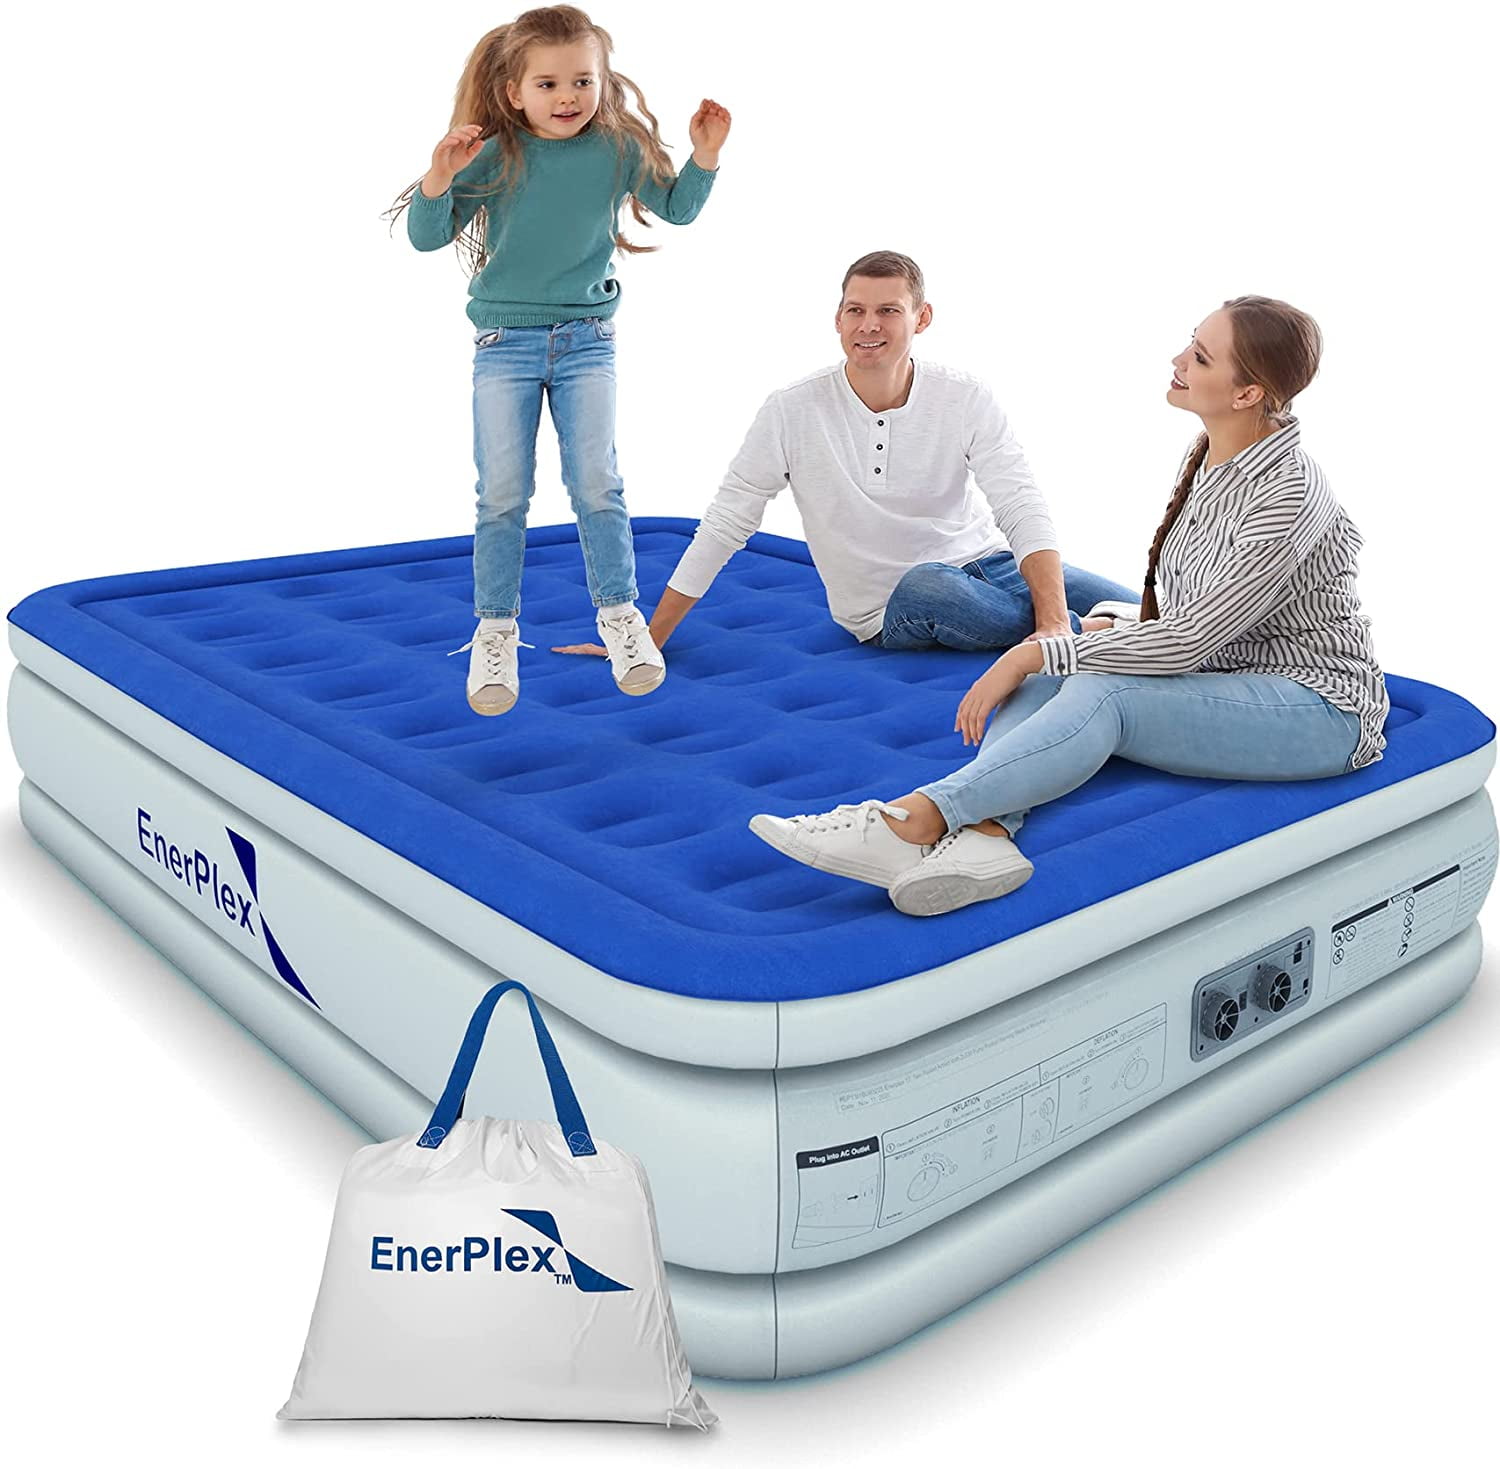 NEW Intex Raised Air Mattress Bed Inflatable Blow Up Queen Airbed Full Size Pump 